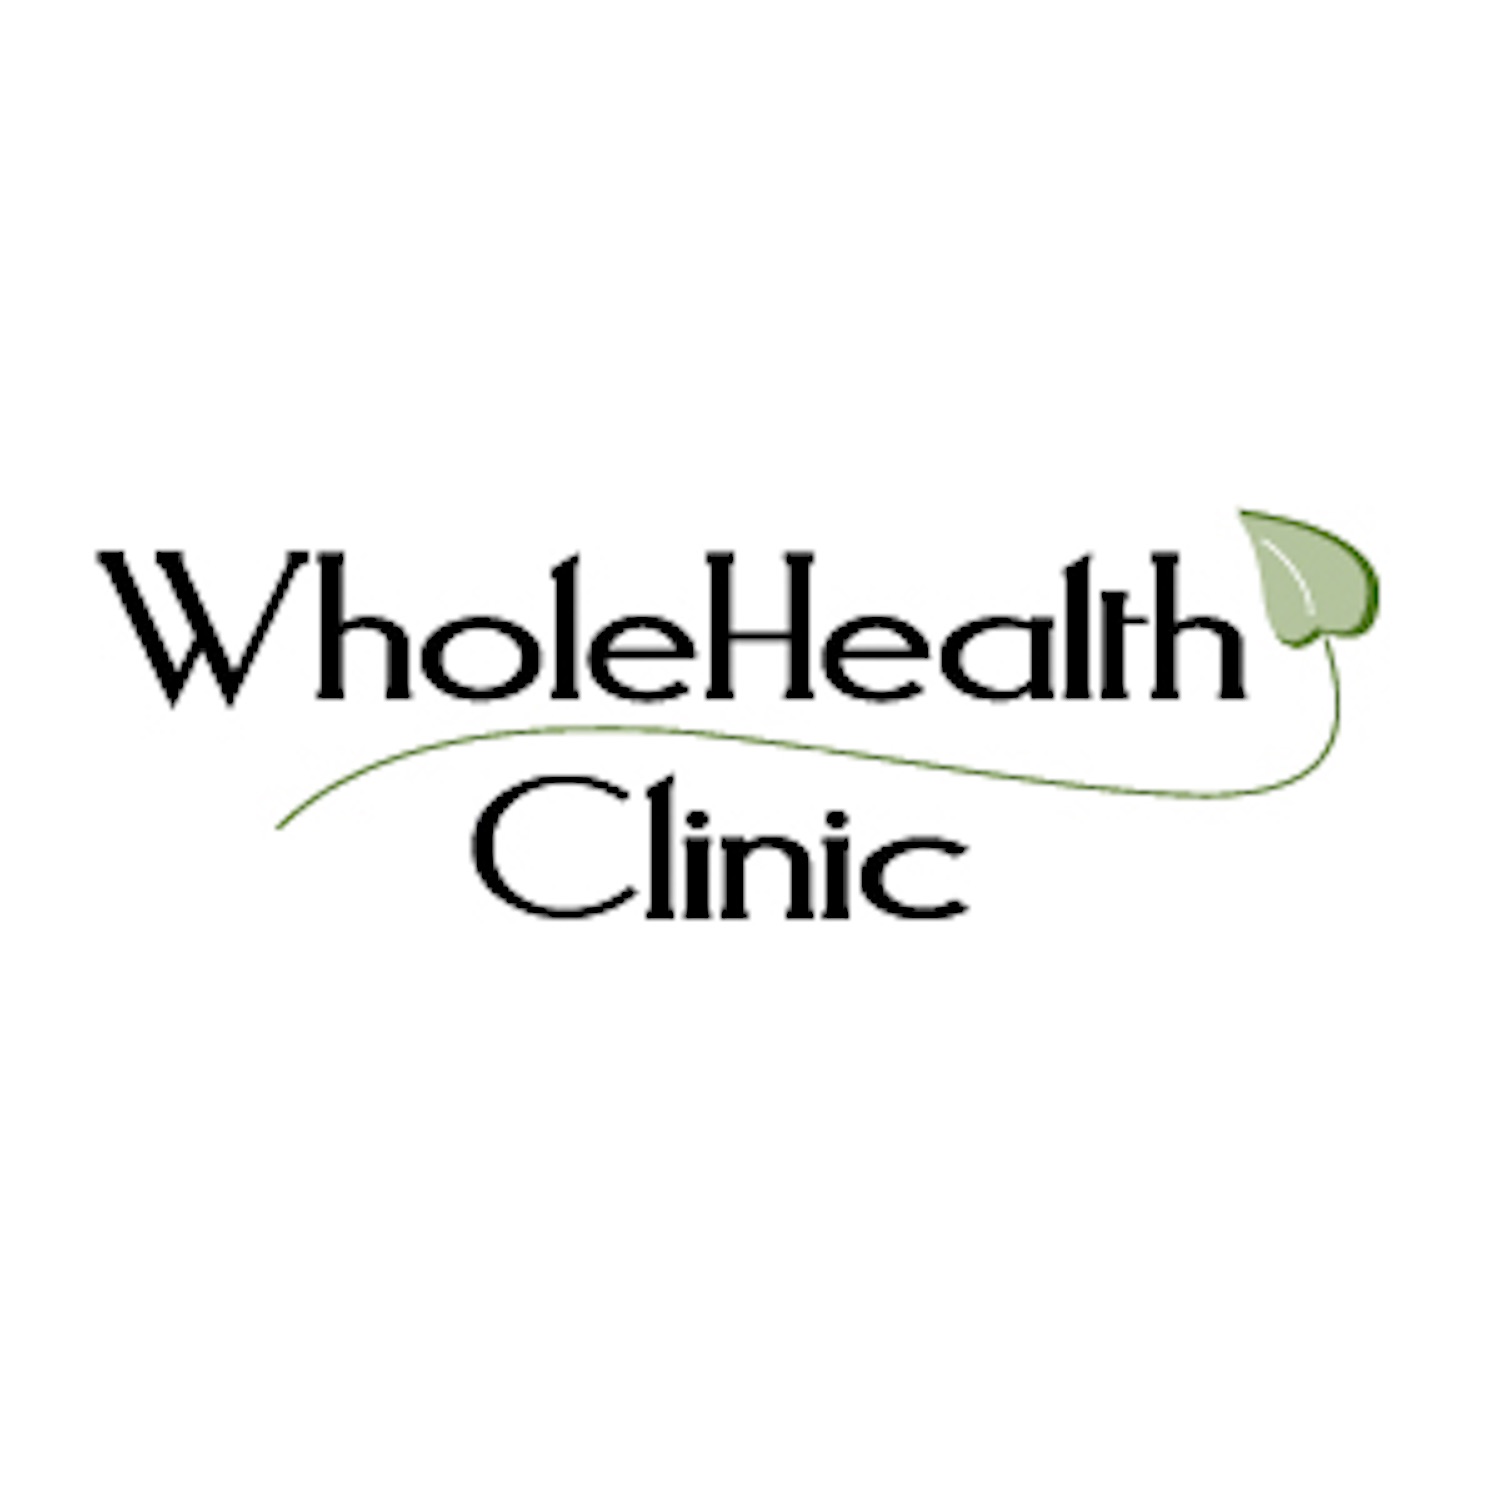 The Whole Health Clinic Podcast